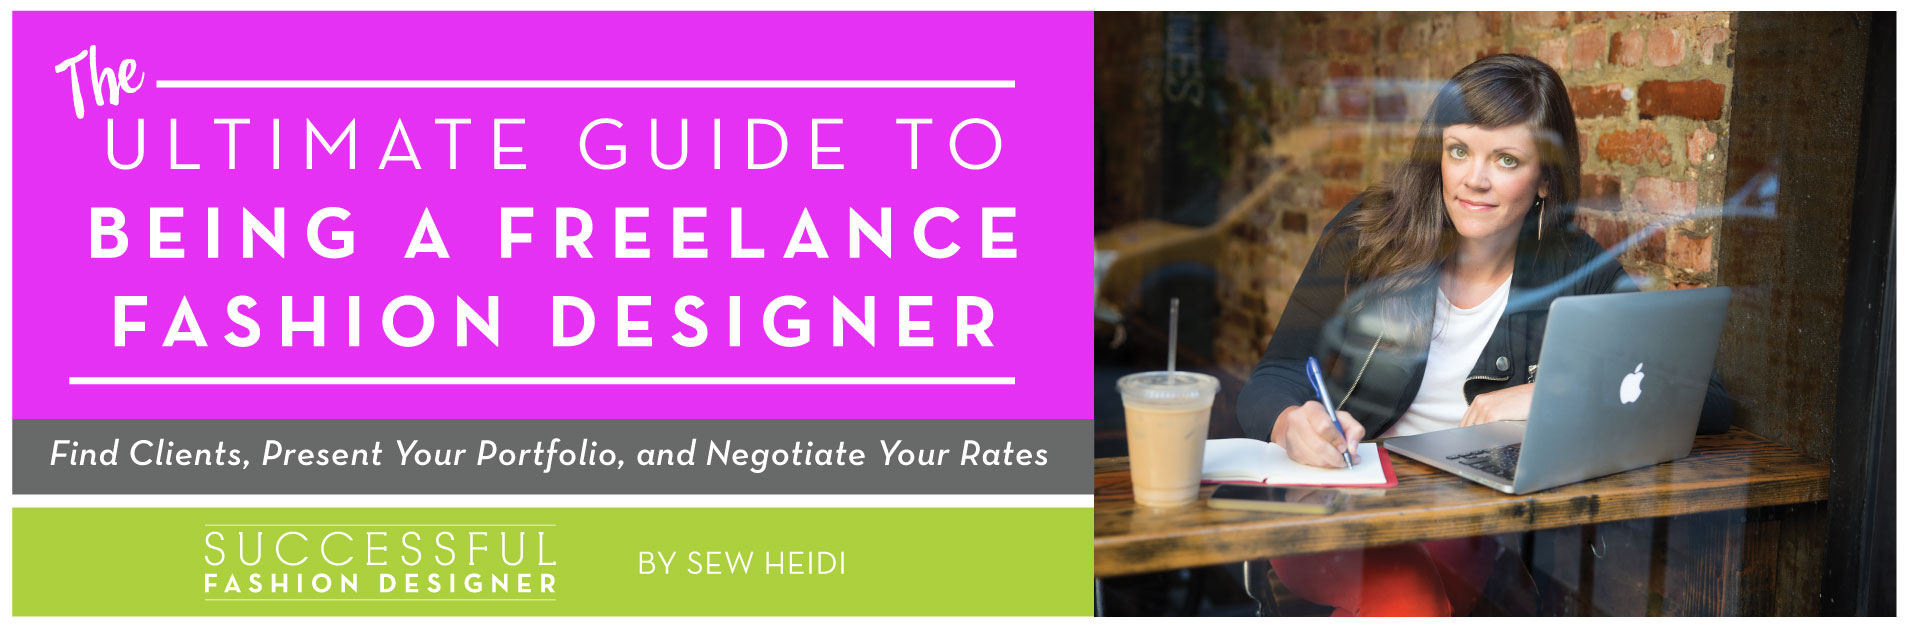 How to Be a Freelance Fashion Designer: The Ultimate Guide by Sew Heidi